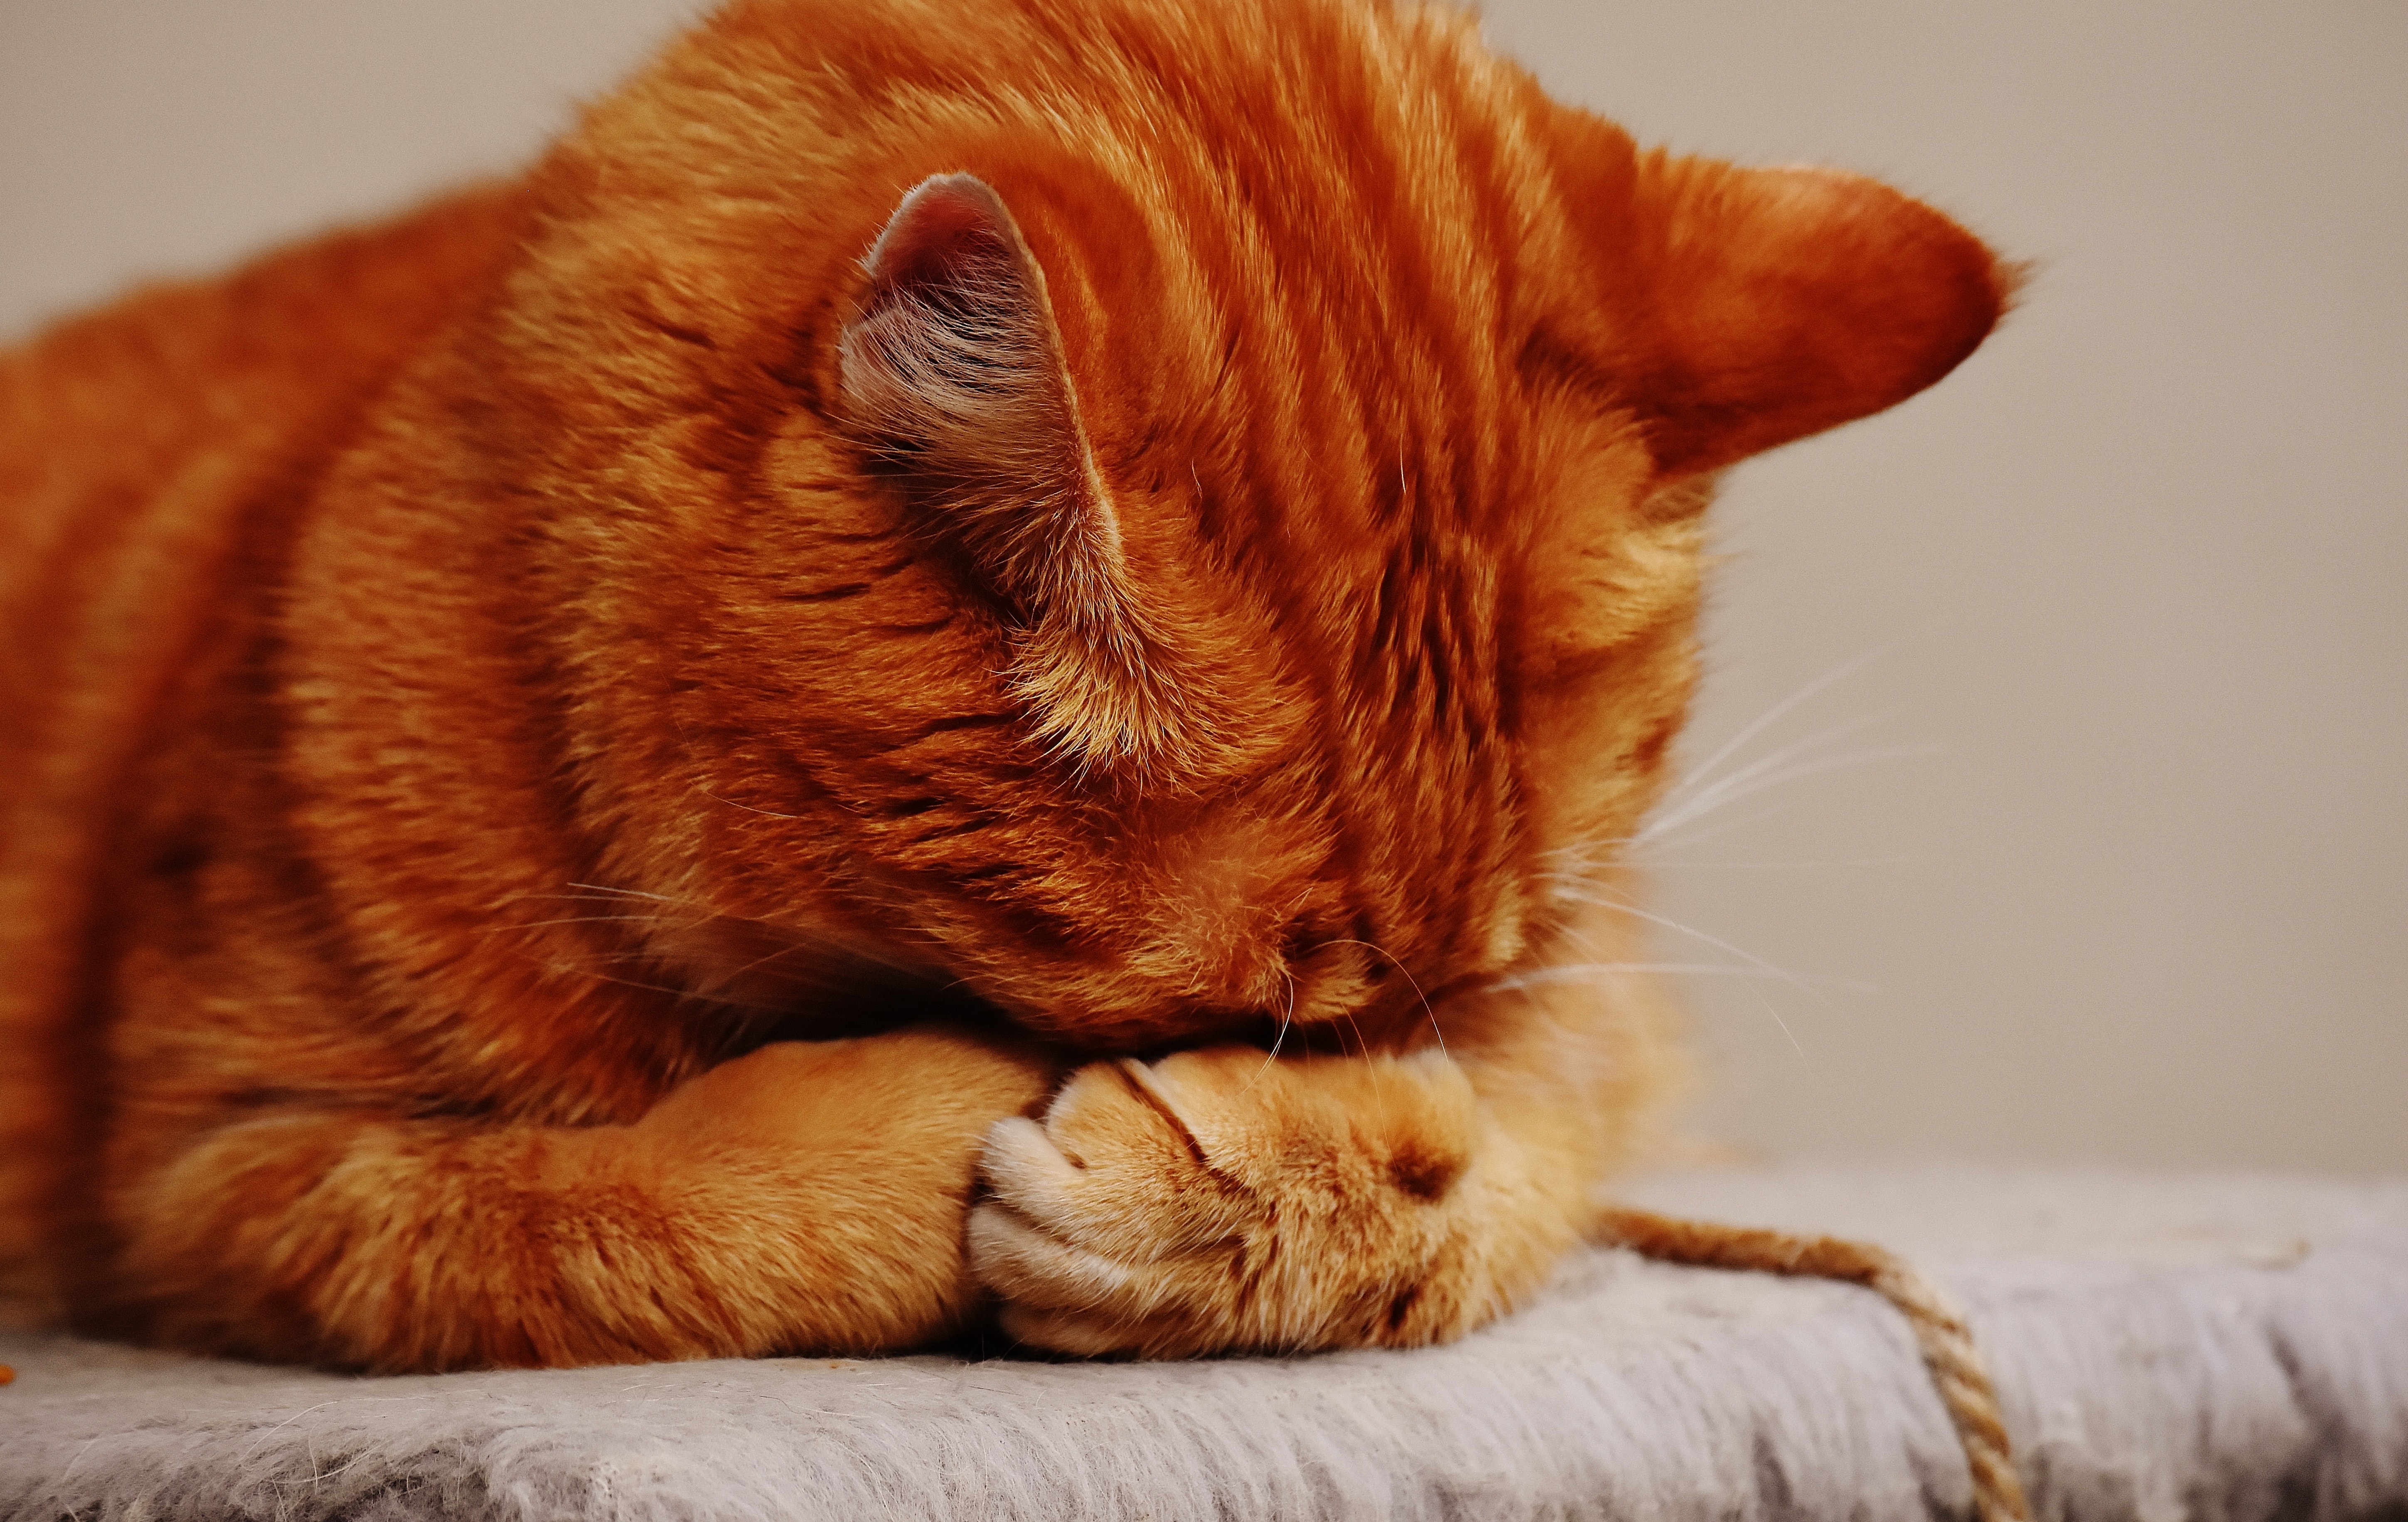  Stress reduction is important for cats with chronic or recurrent cystitis.